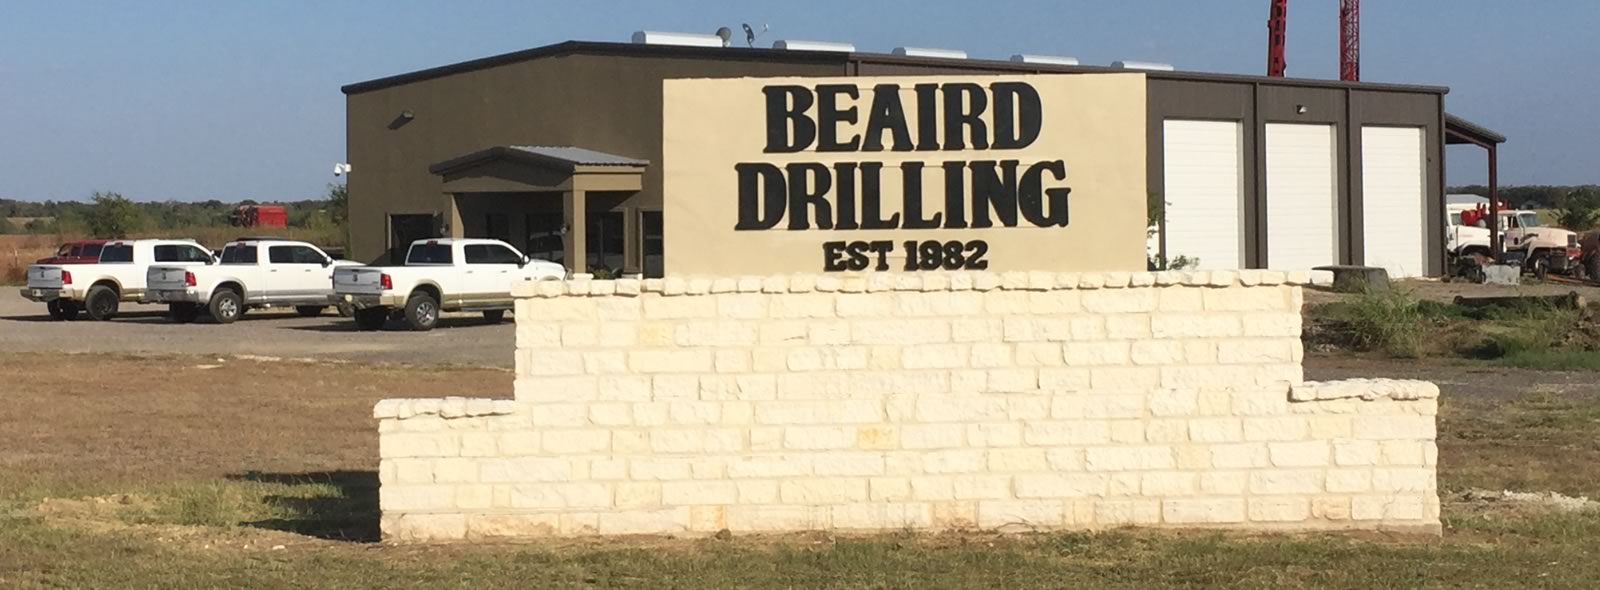 Beaird Drilling Company